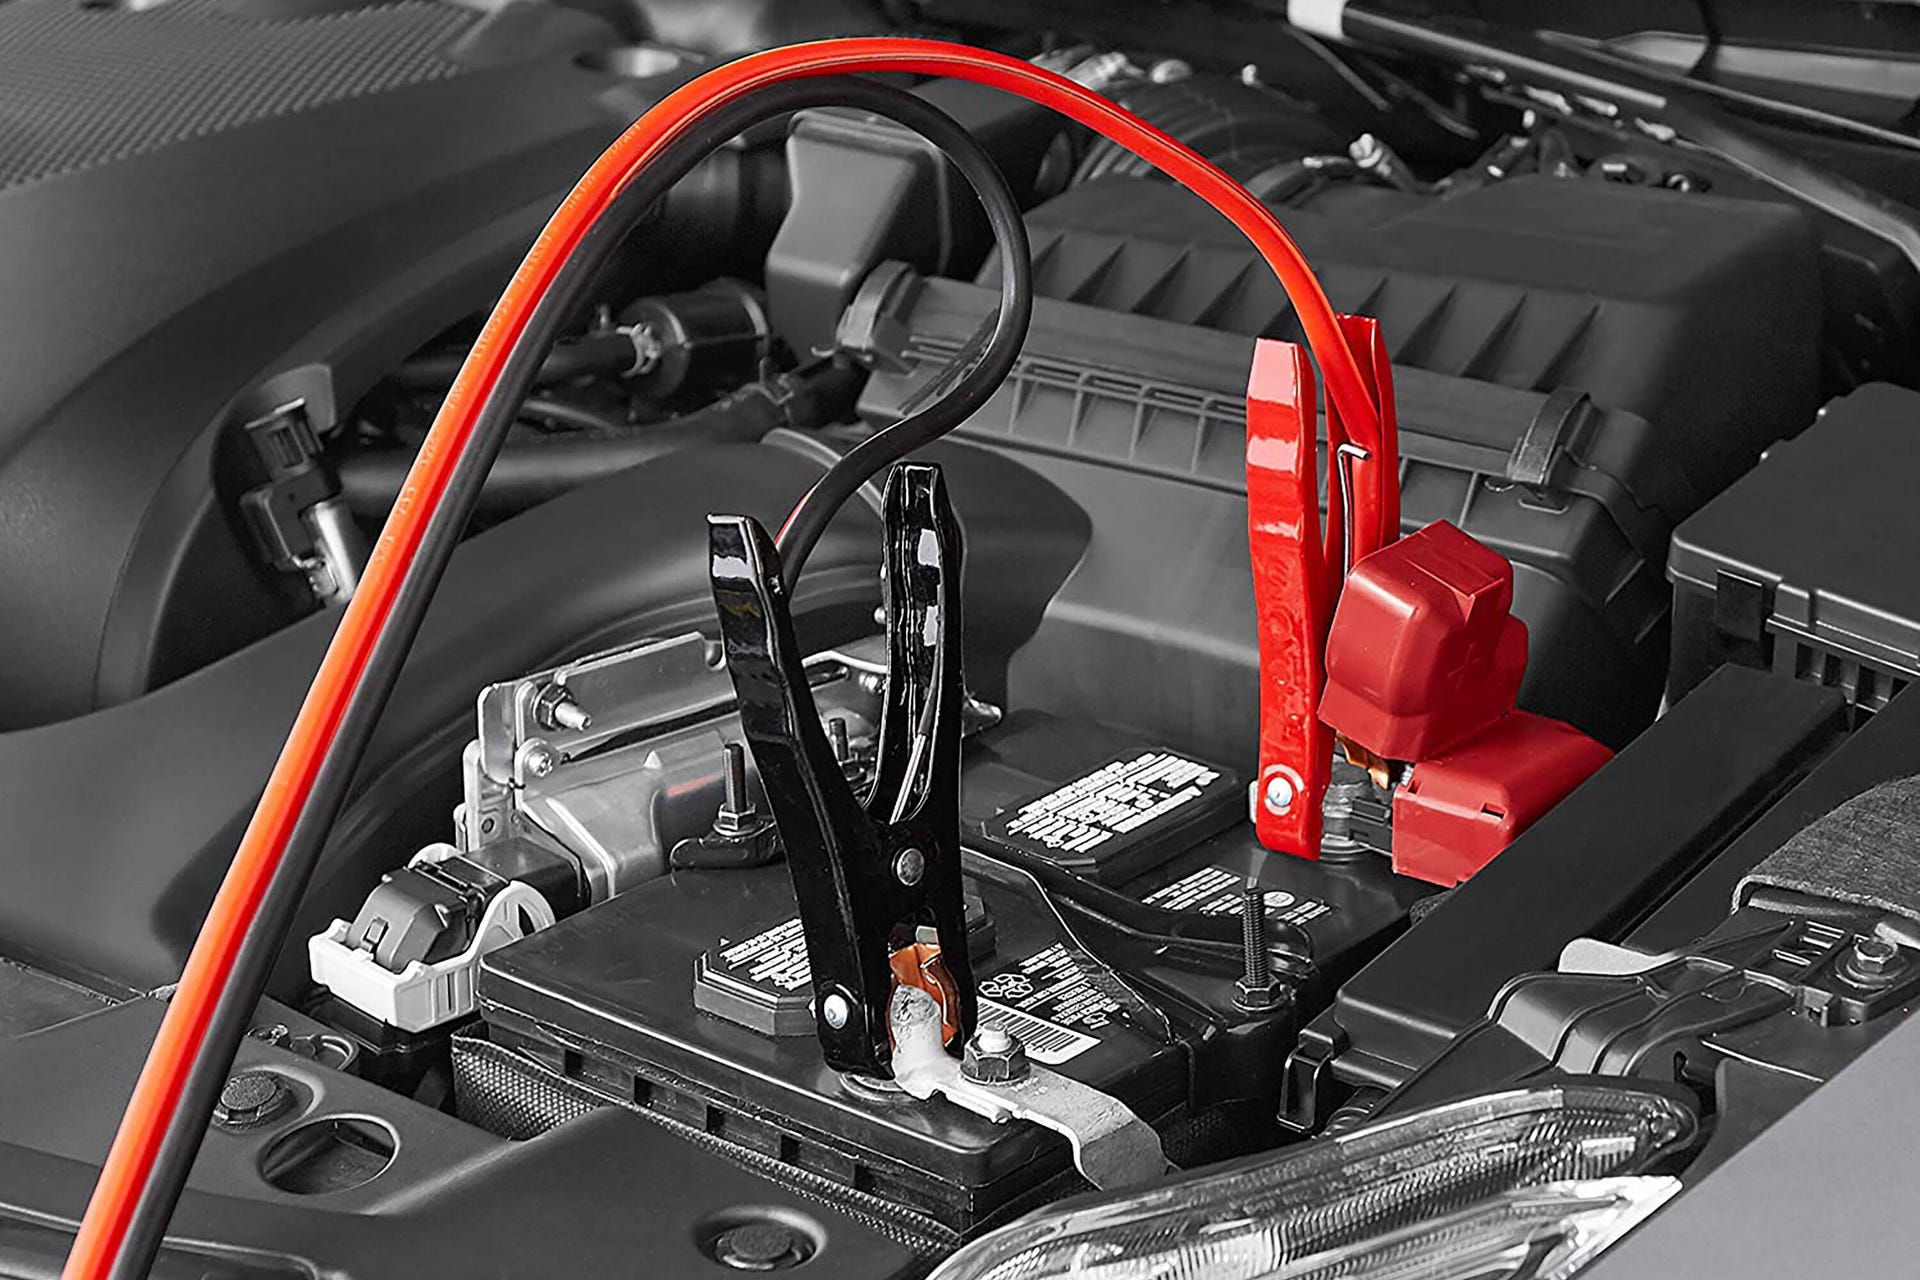 Two Amazon Basics jumper cables hooked up to a car battery